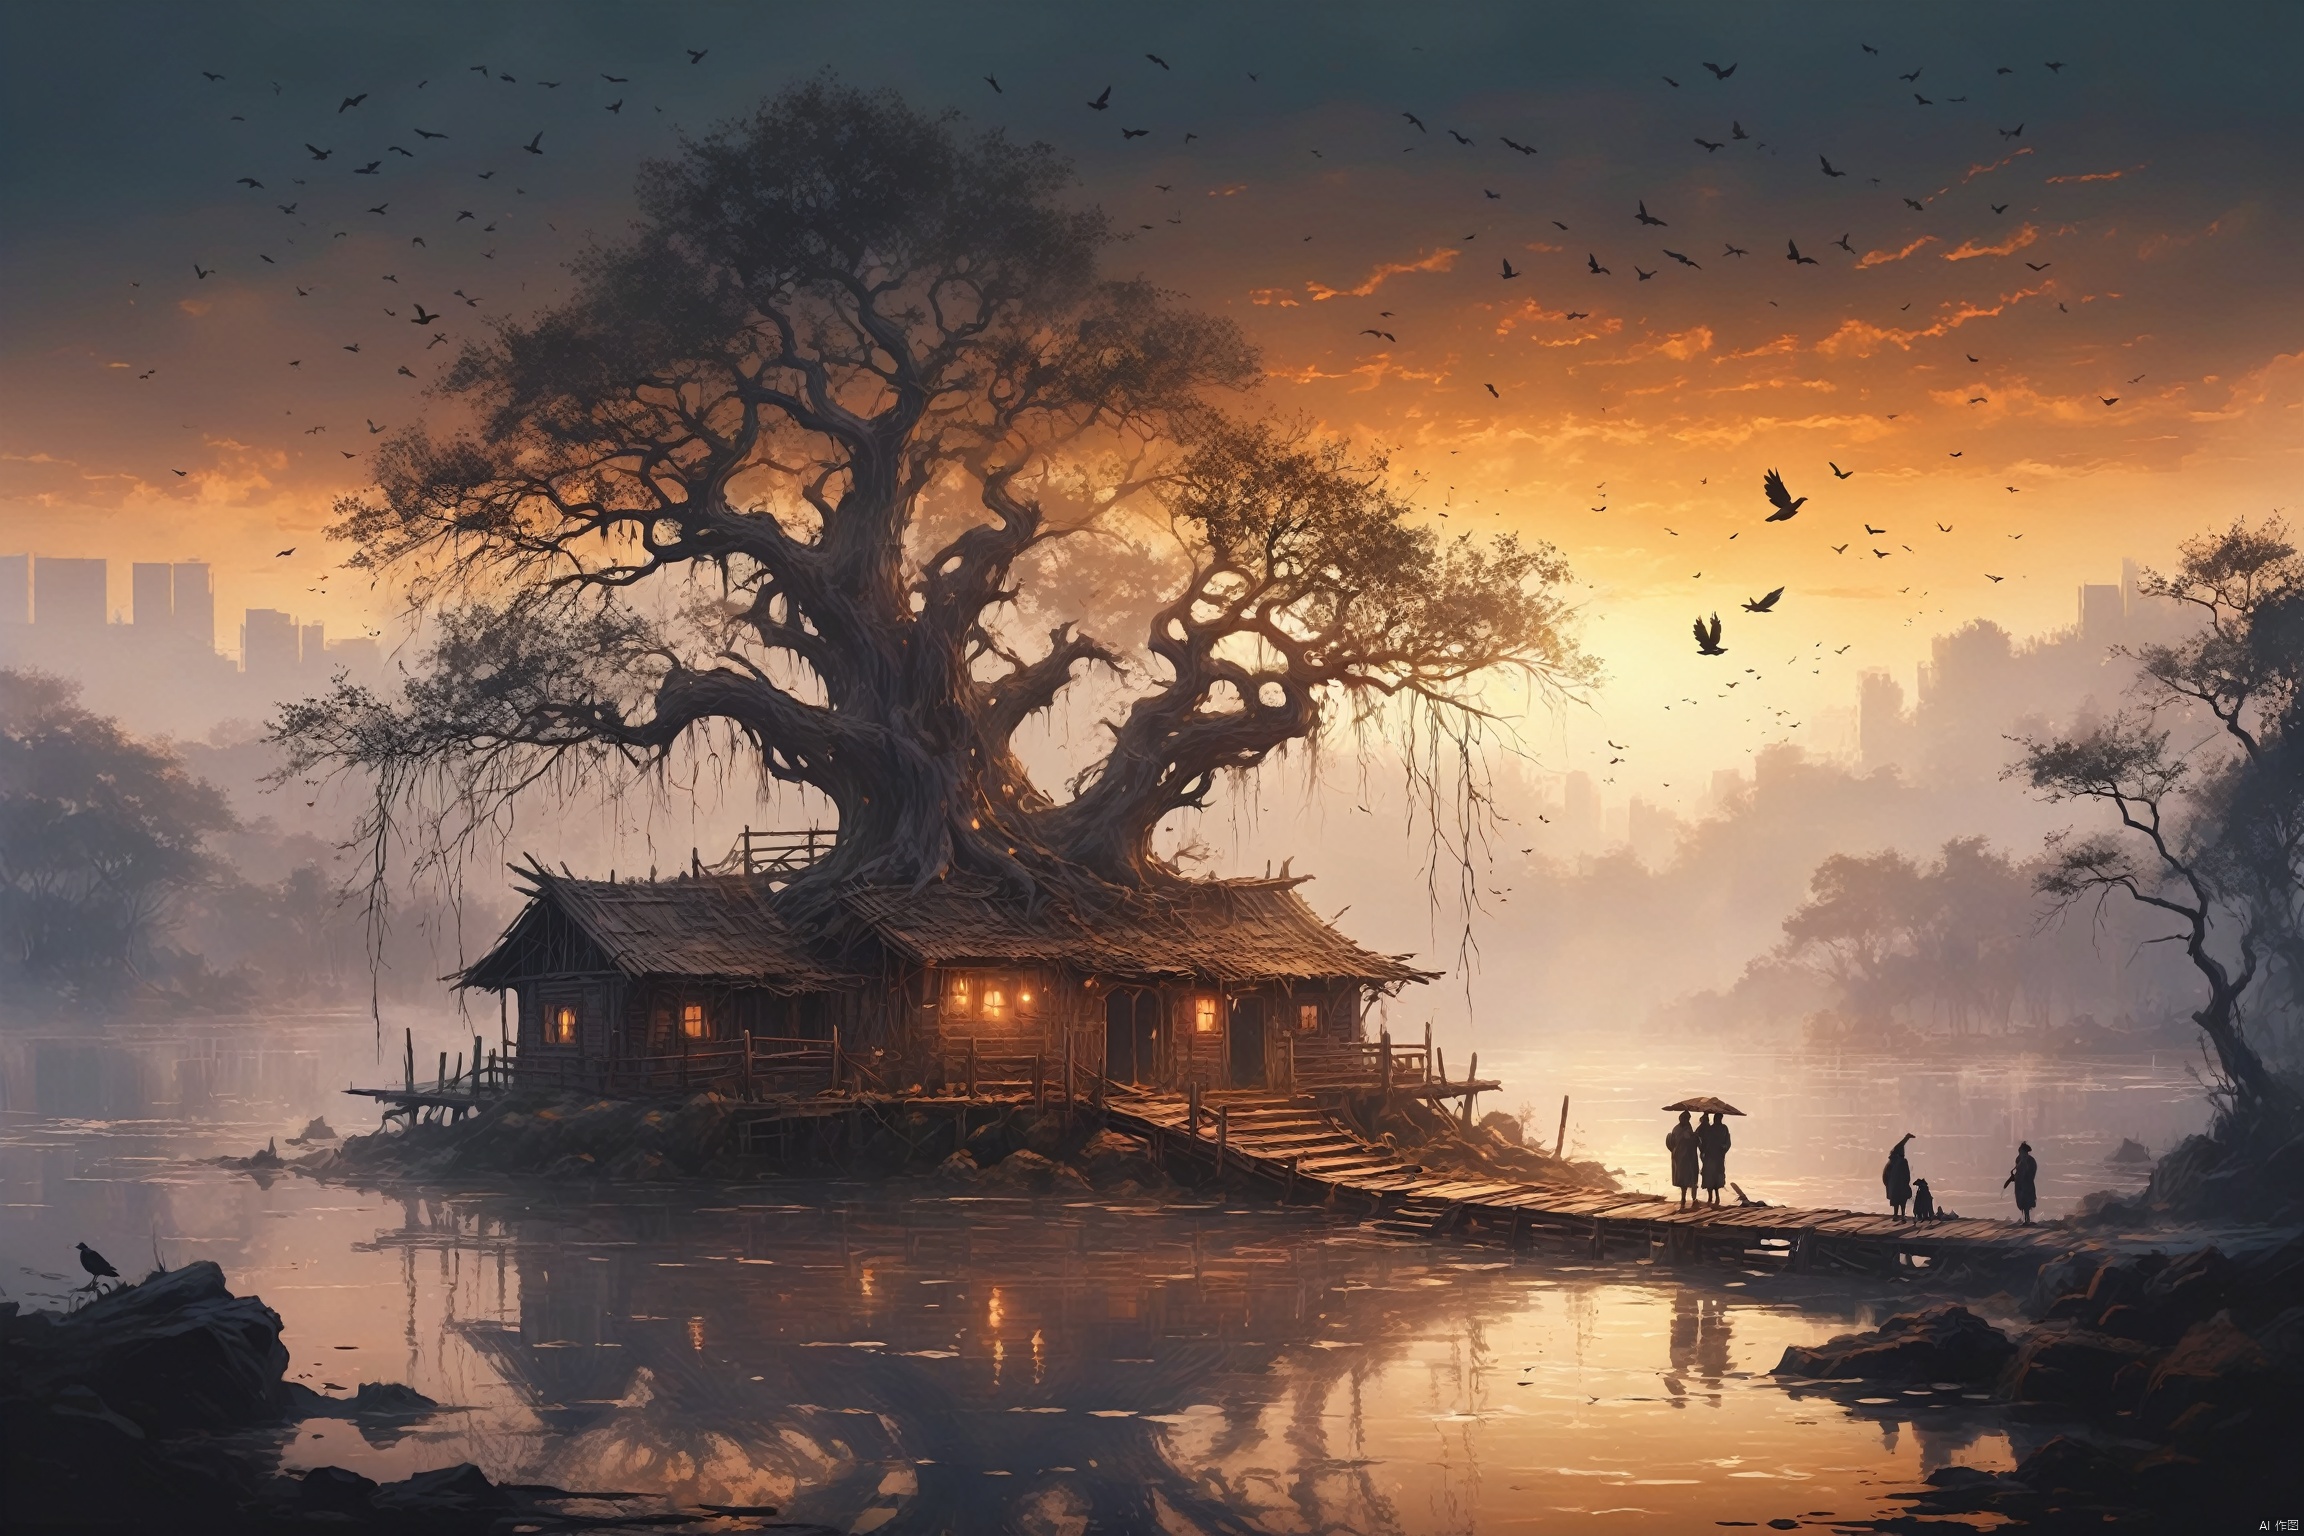  ((best quality)), ((masterpiece)),Withered rattan old tree dark crows, small bridge water family,Broken-down, sad atmosphere,A run-down cabin
,(illustration style:1.1), (dynamic composition:1.2), (unfettered spirit:0.9),